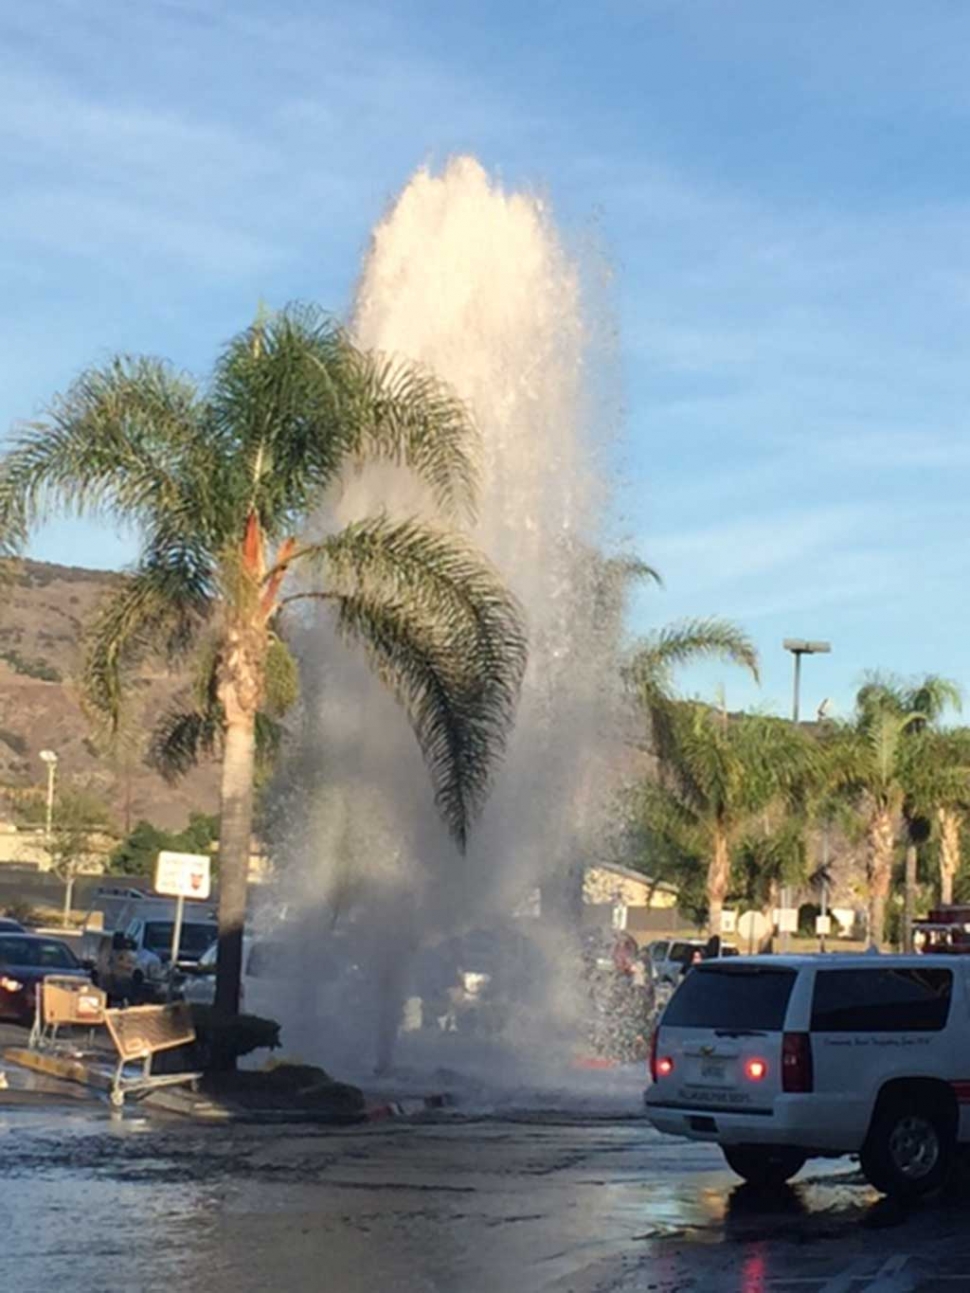 A fire hydrant busted open in front of RiteAid on Wednesday, November 18th, at 3:30pm. The geyser gushed approximately 50 feet into the air for about 15 minutes before city workers turned off the water. Vons parking lot was flooding but there were no injuries. See video below.